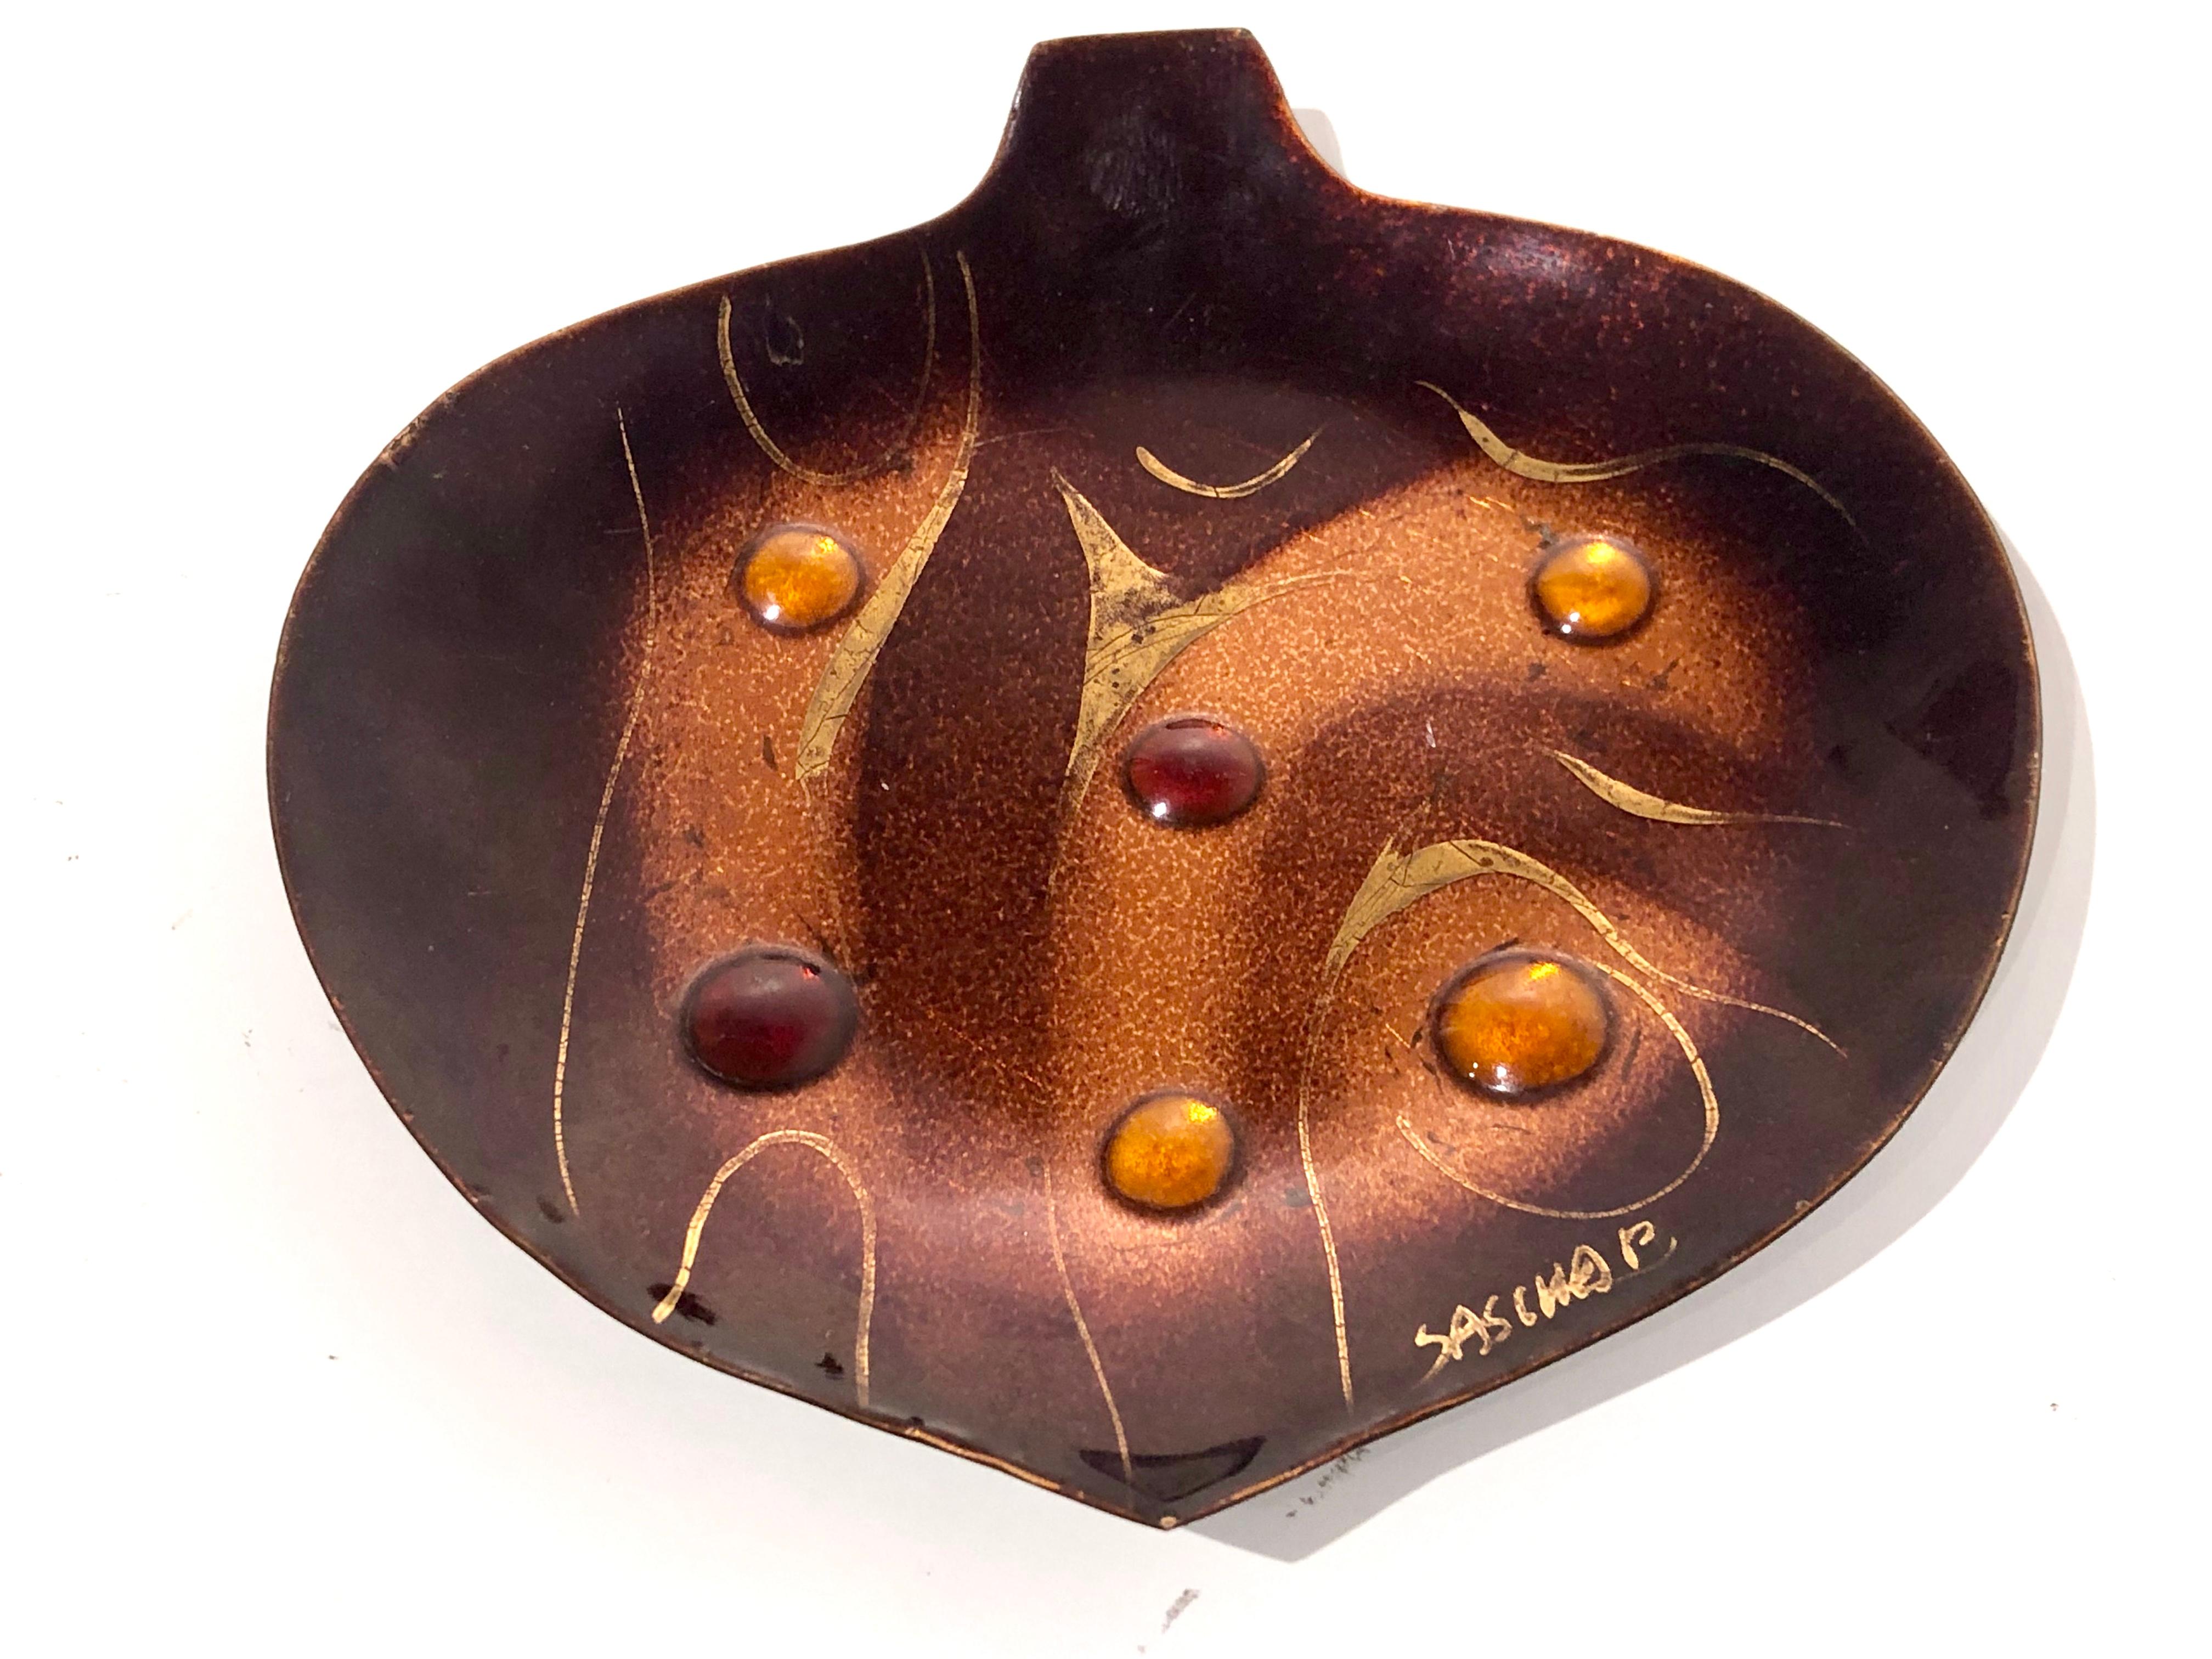 Freeform Enamel on Copper Decorative Abstract Plate by Sascha Brastoff In Good Condition For Sale In San Diego, CA